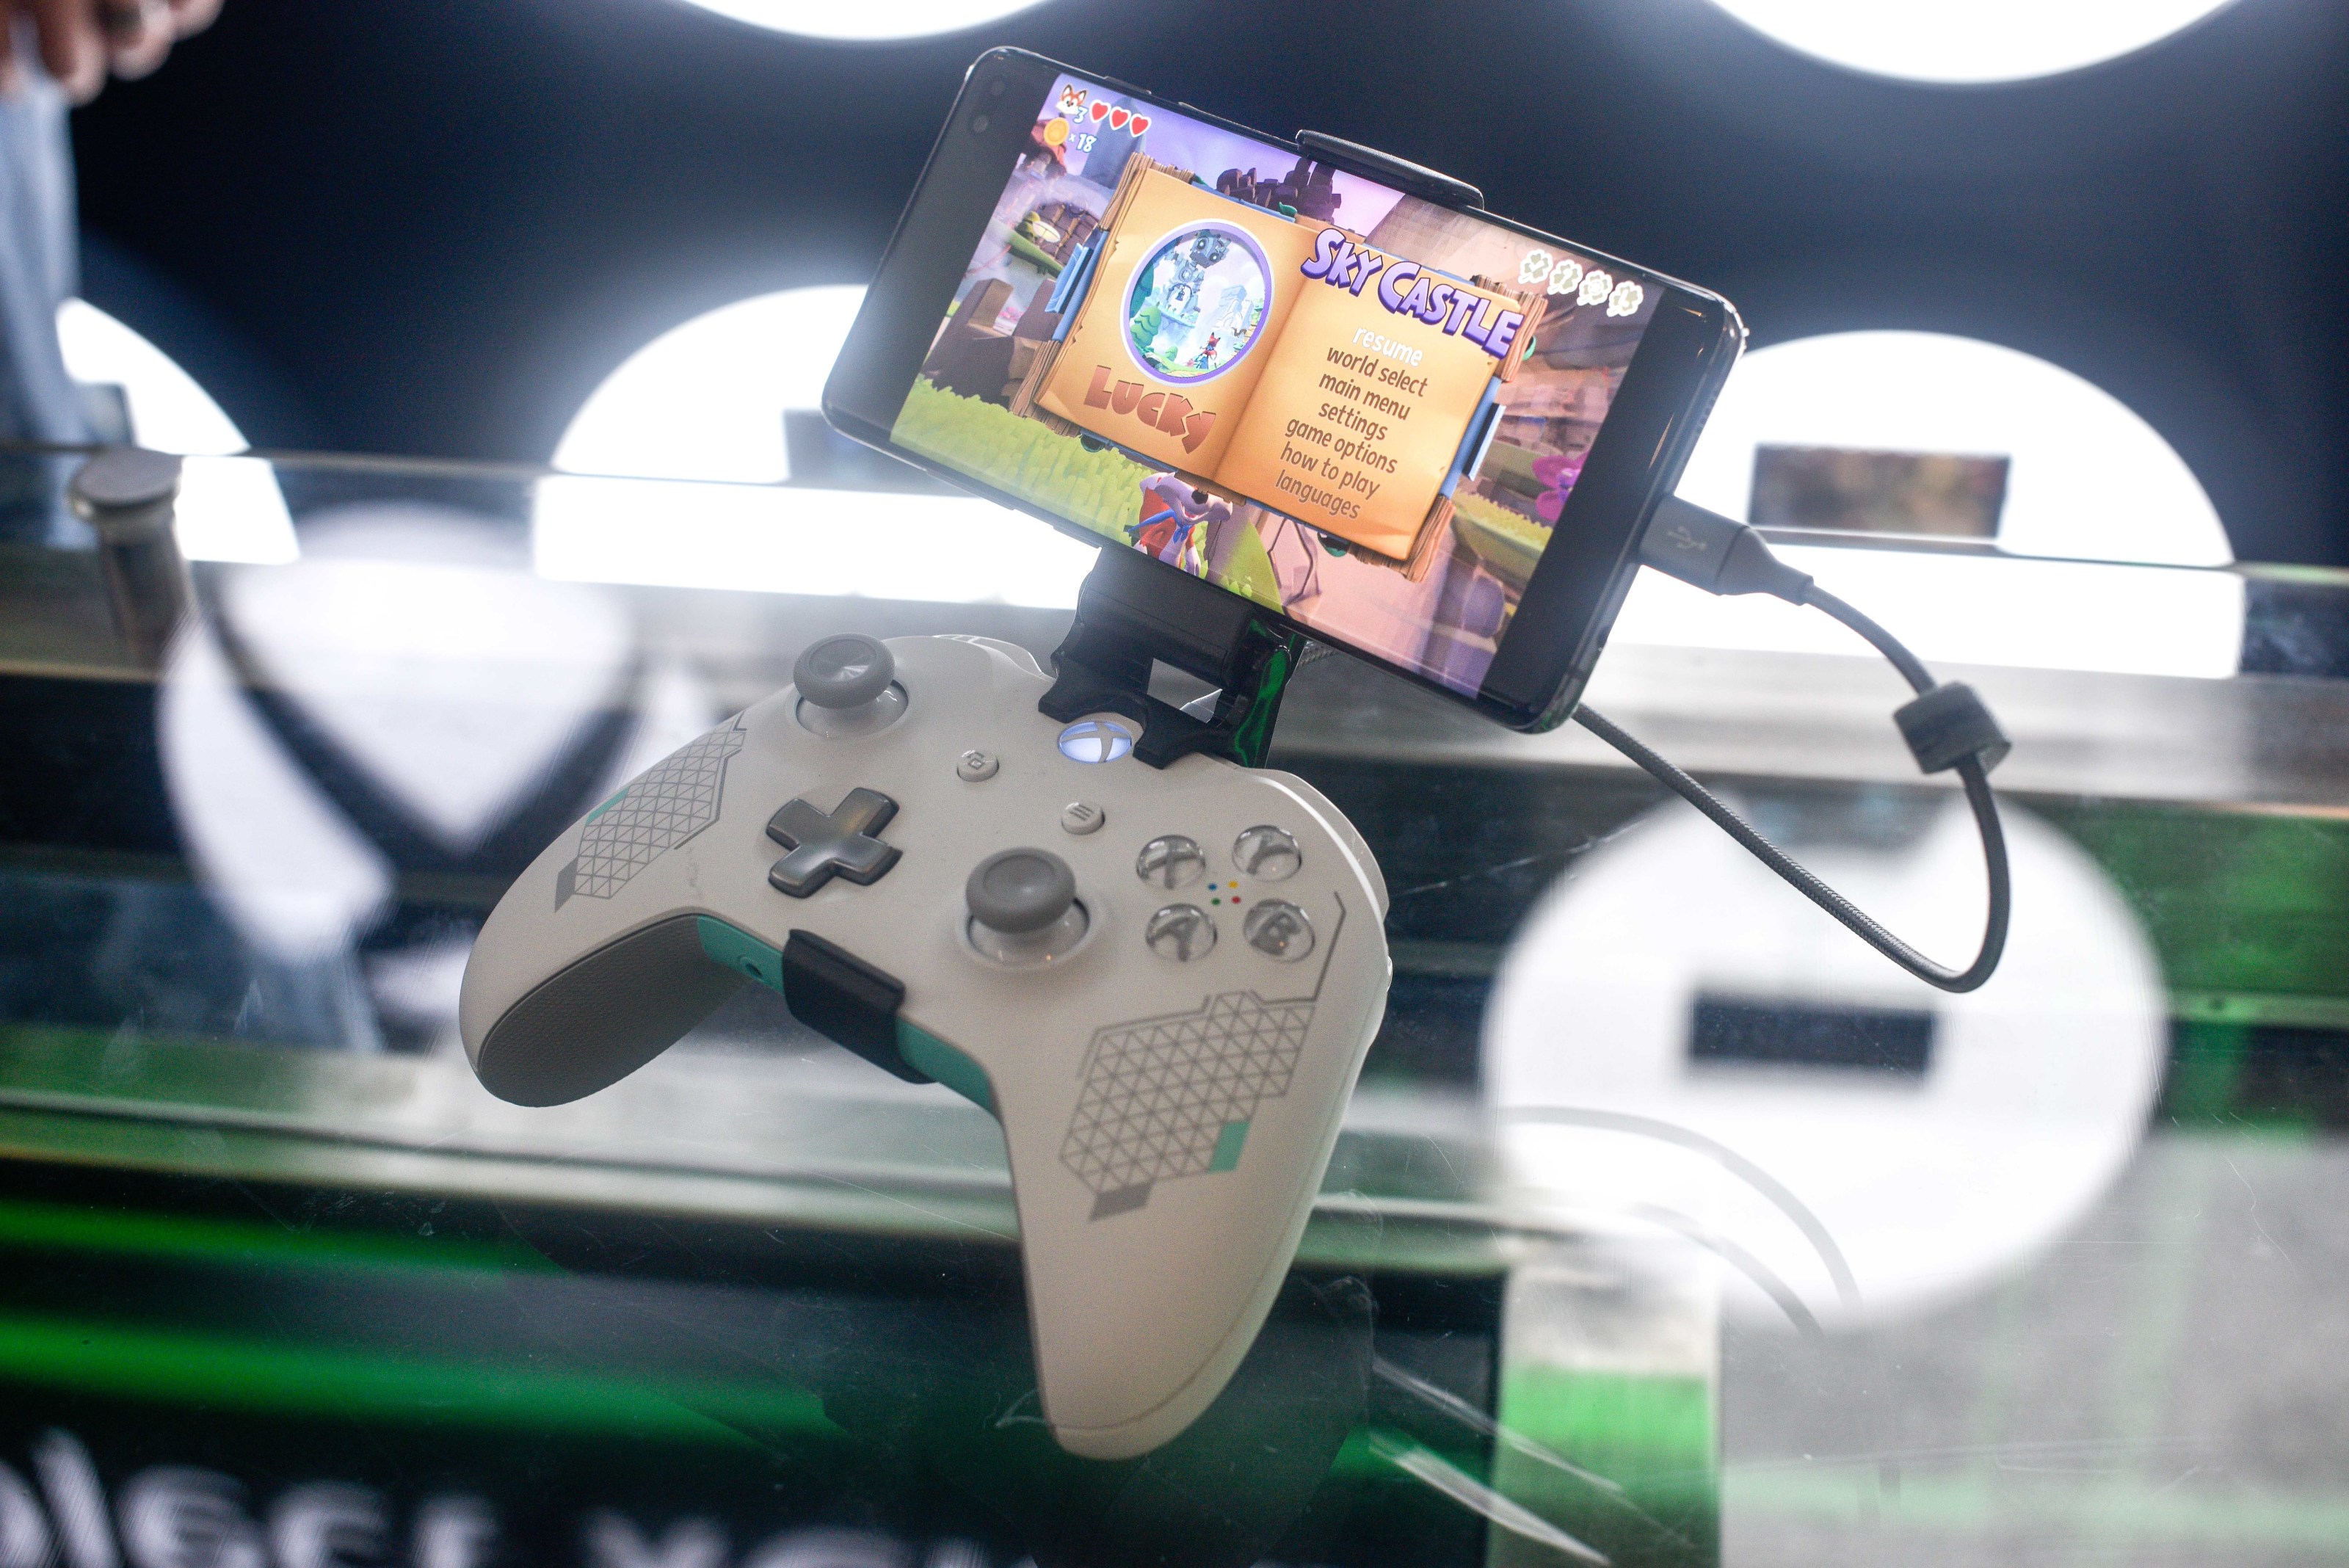 LONDON, ENGLAND - JULY 11: An Xbox xCloud device on display at the Microsoft store opening on July 11, 2019 in London, England. Microsoft opened their first flagship store in Europe this morning, August 11. (Photo by Peter Summers/Getty Images)